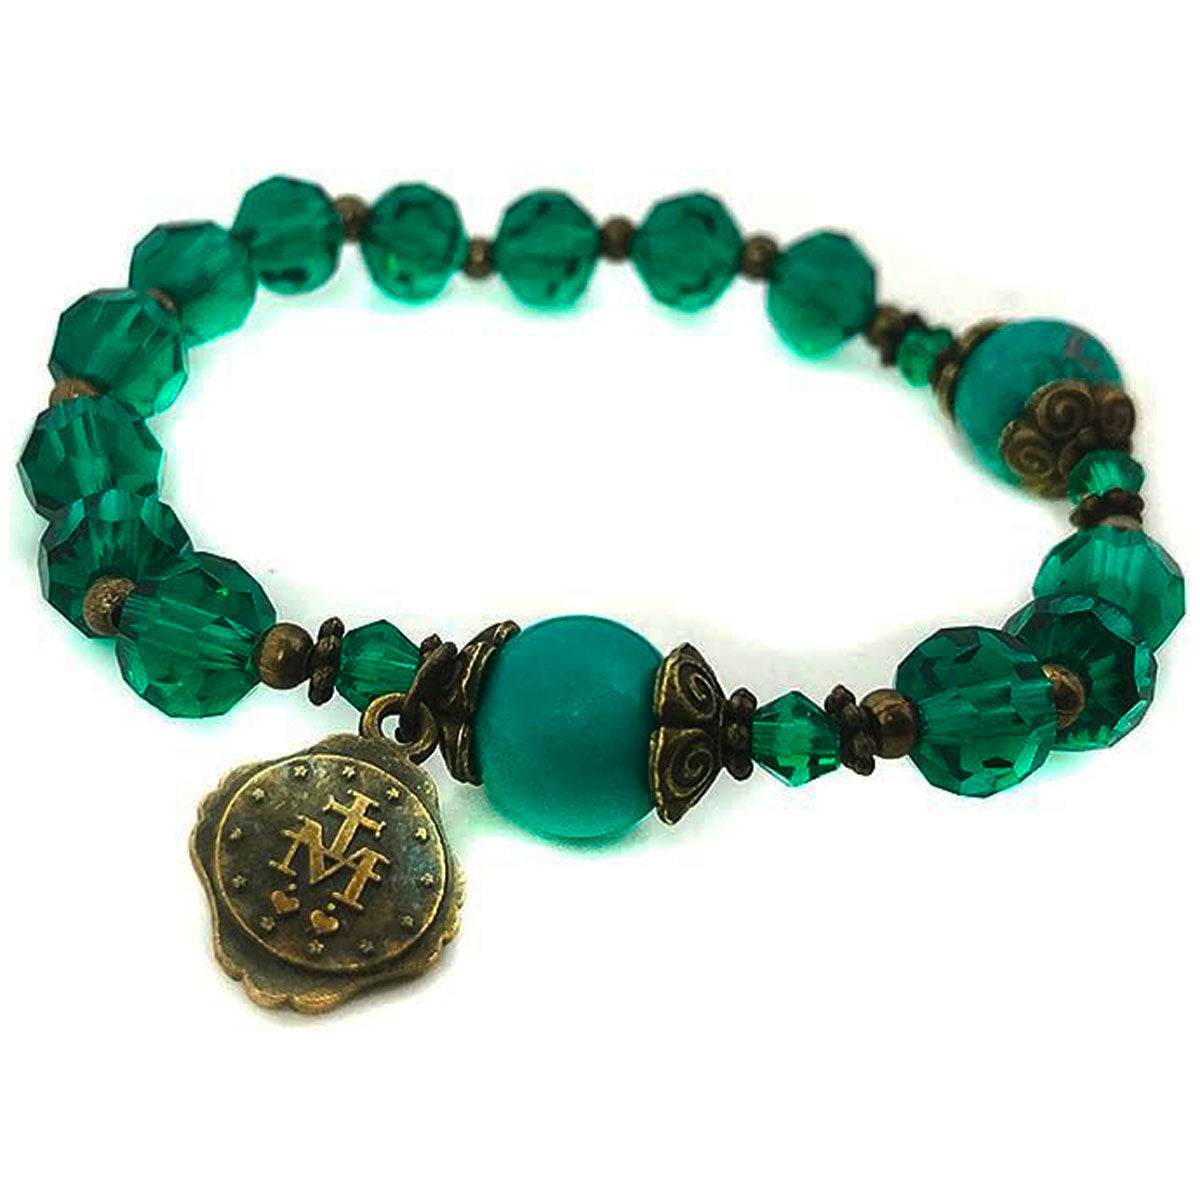 St. Jude Crystal and Green Sandstone Rosary and Bracelet Set by Catholic Heirlooms